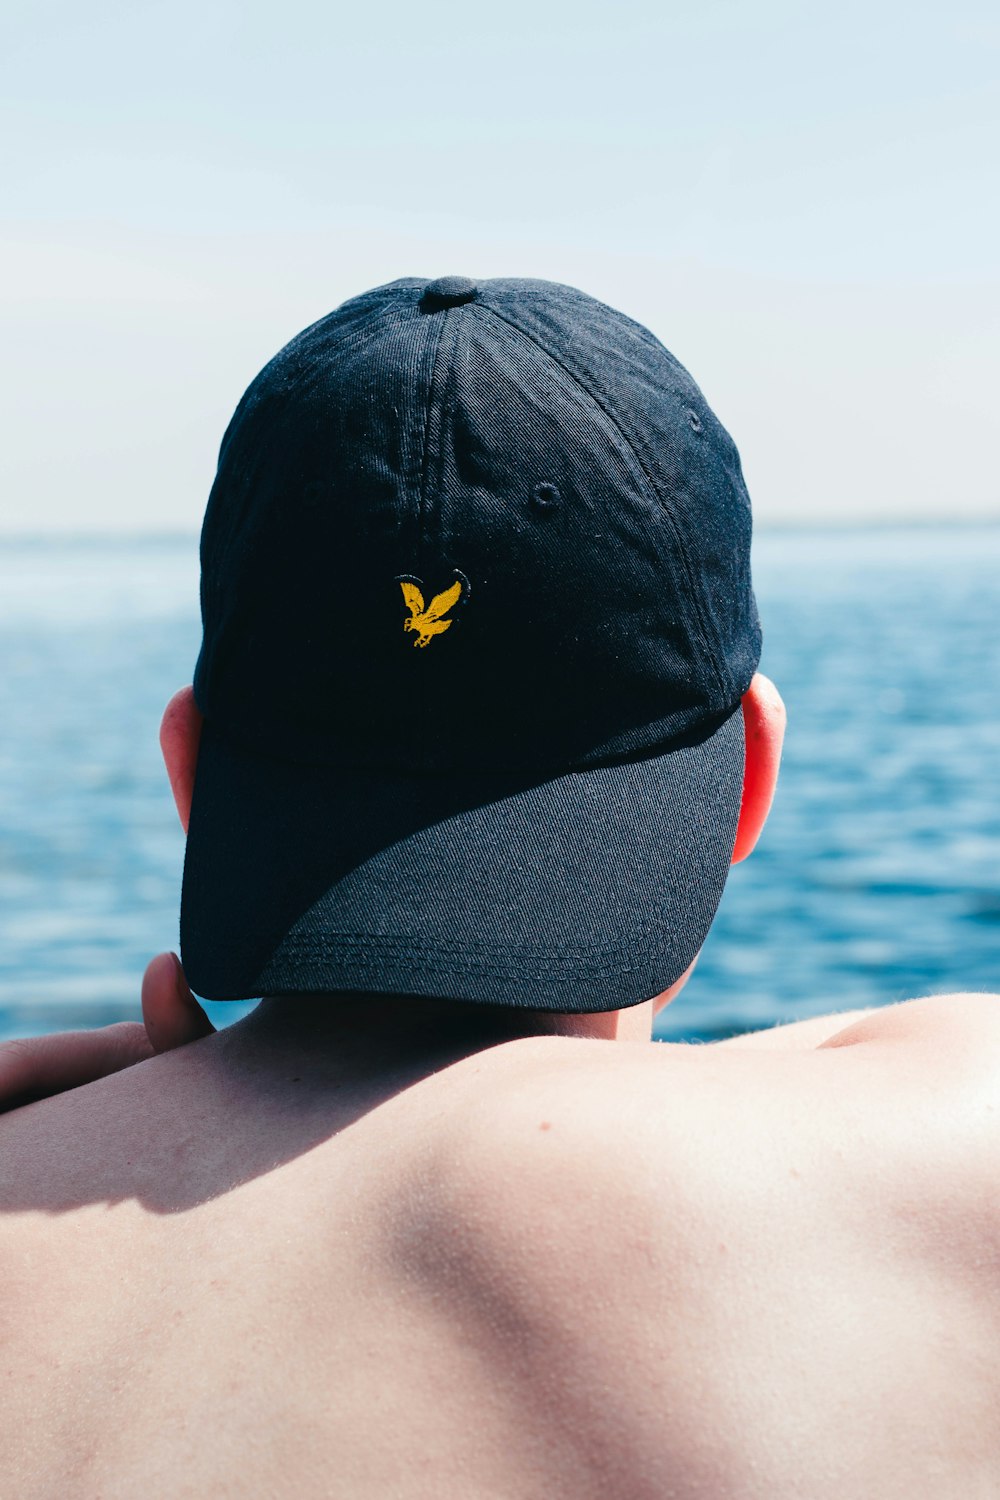 a man wearing a hat looking out at the ocean